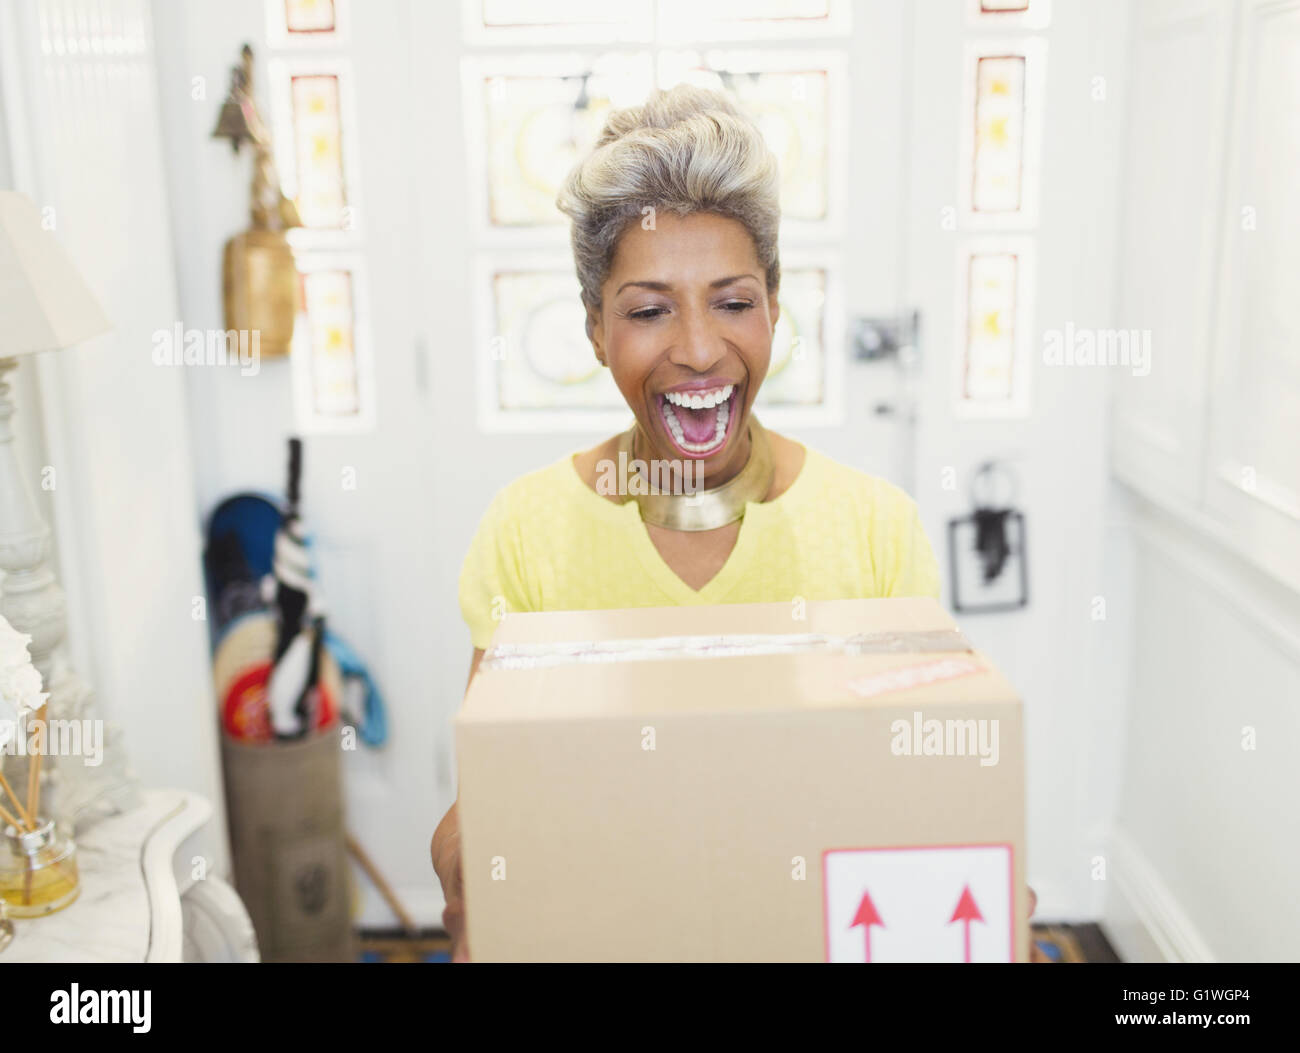 Enthusiastic mature woman receiving package in foyer Stock Photo